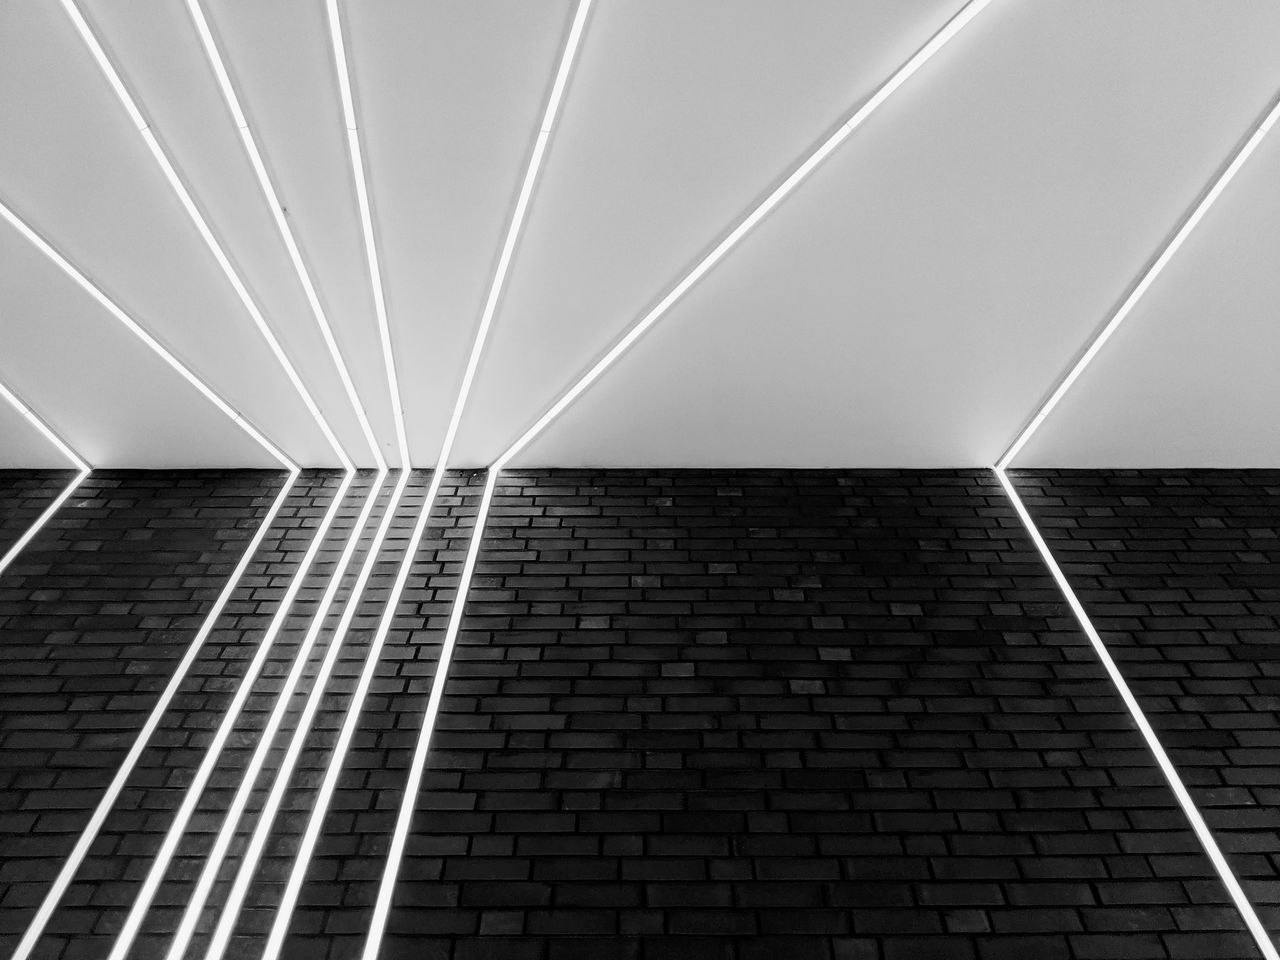 Low angle view of illuminated fluorescent lights on wall and ceiling